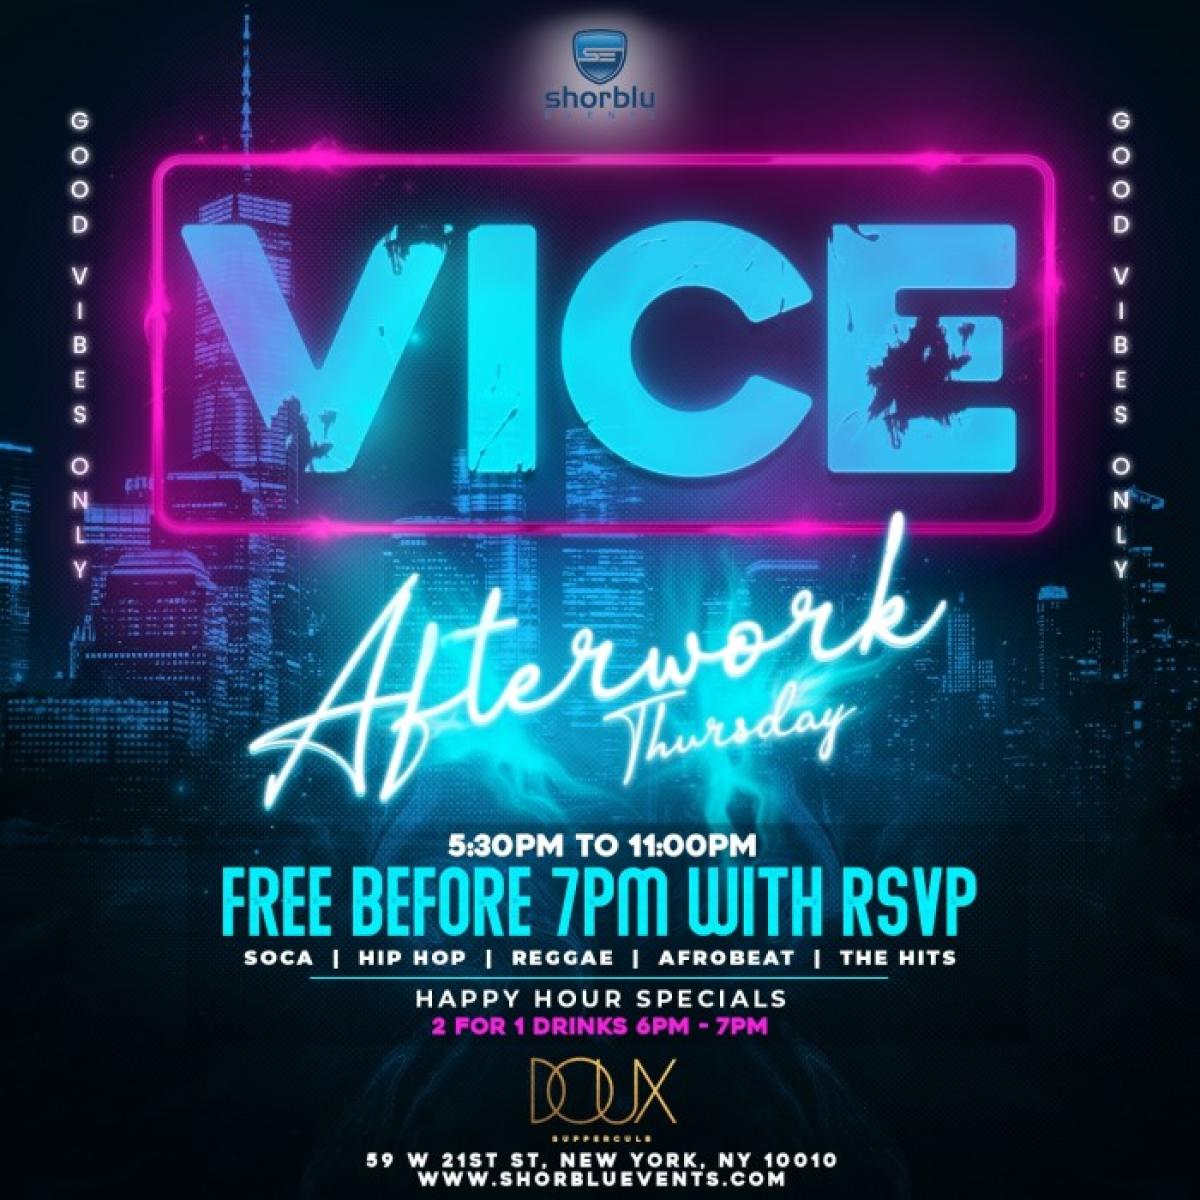 Vice After Work Thursdays flyer or graphic.